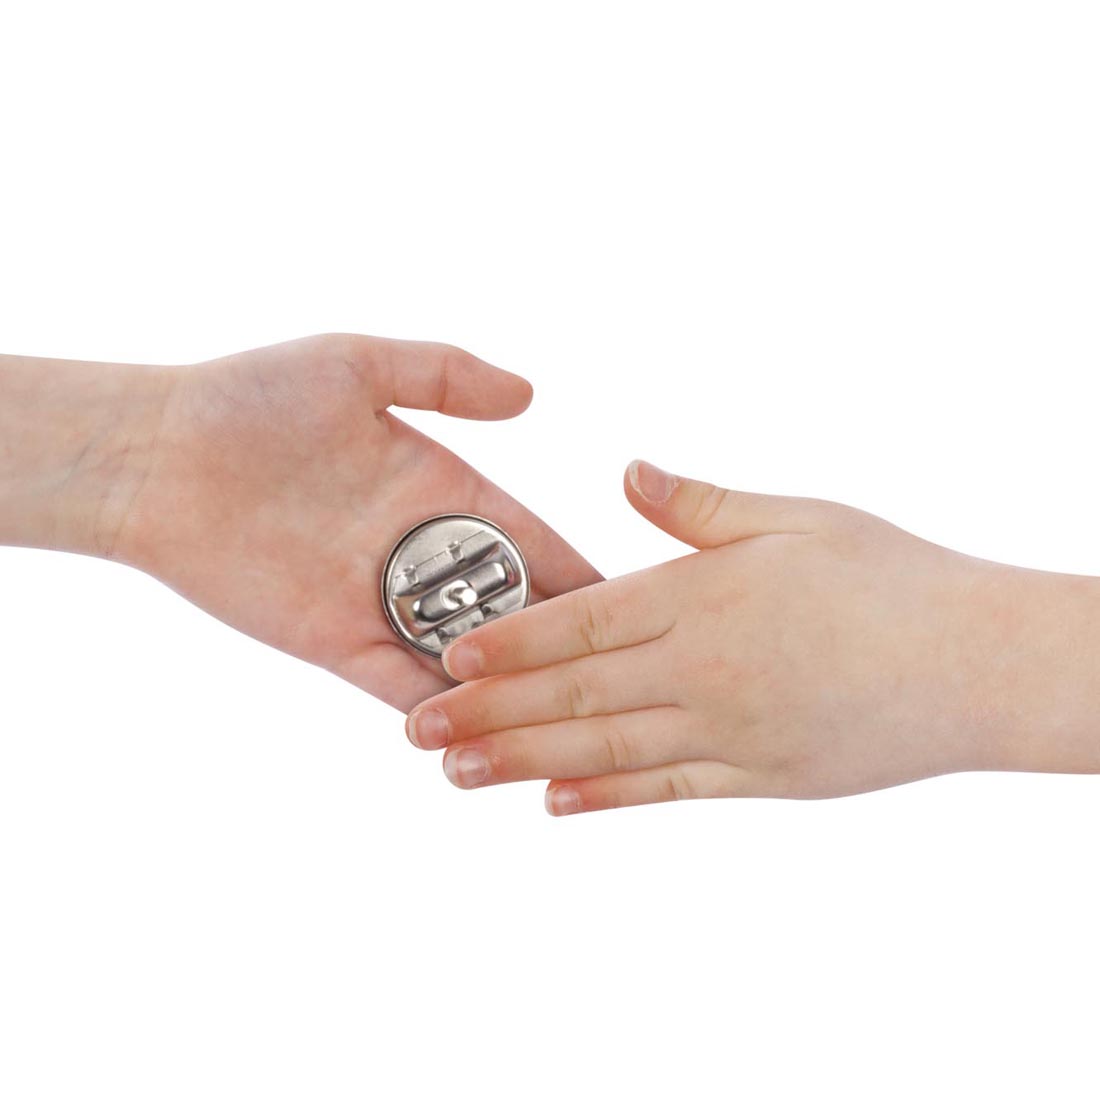 Two hands demonstrating the Classics Hand Buzzer by Toysmith